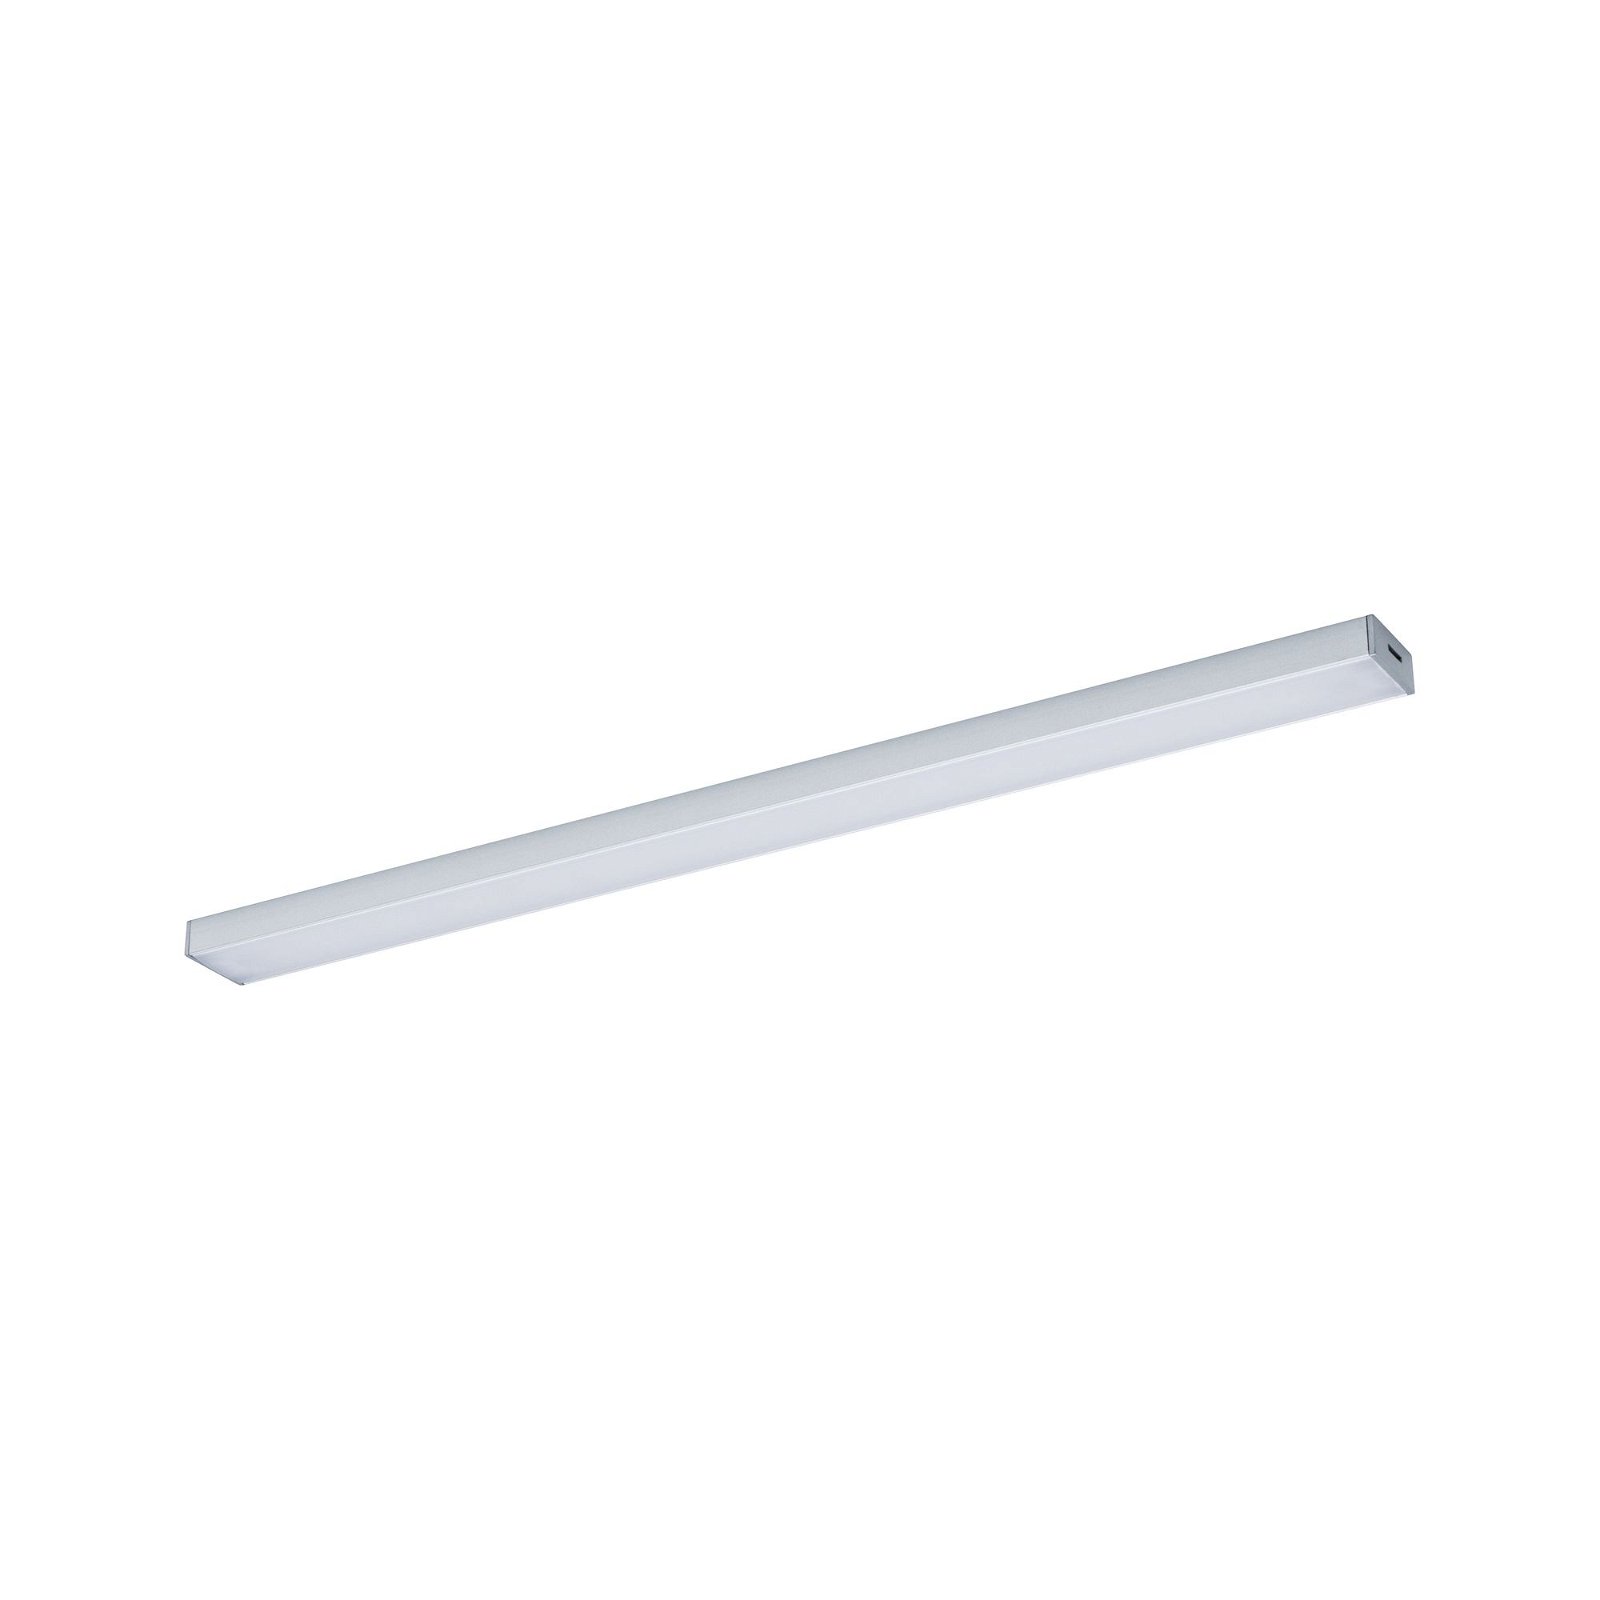 Clever Connect LED Spot Barre Tunable White 3,5W Chrom matt